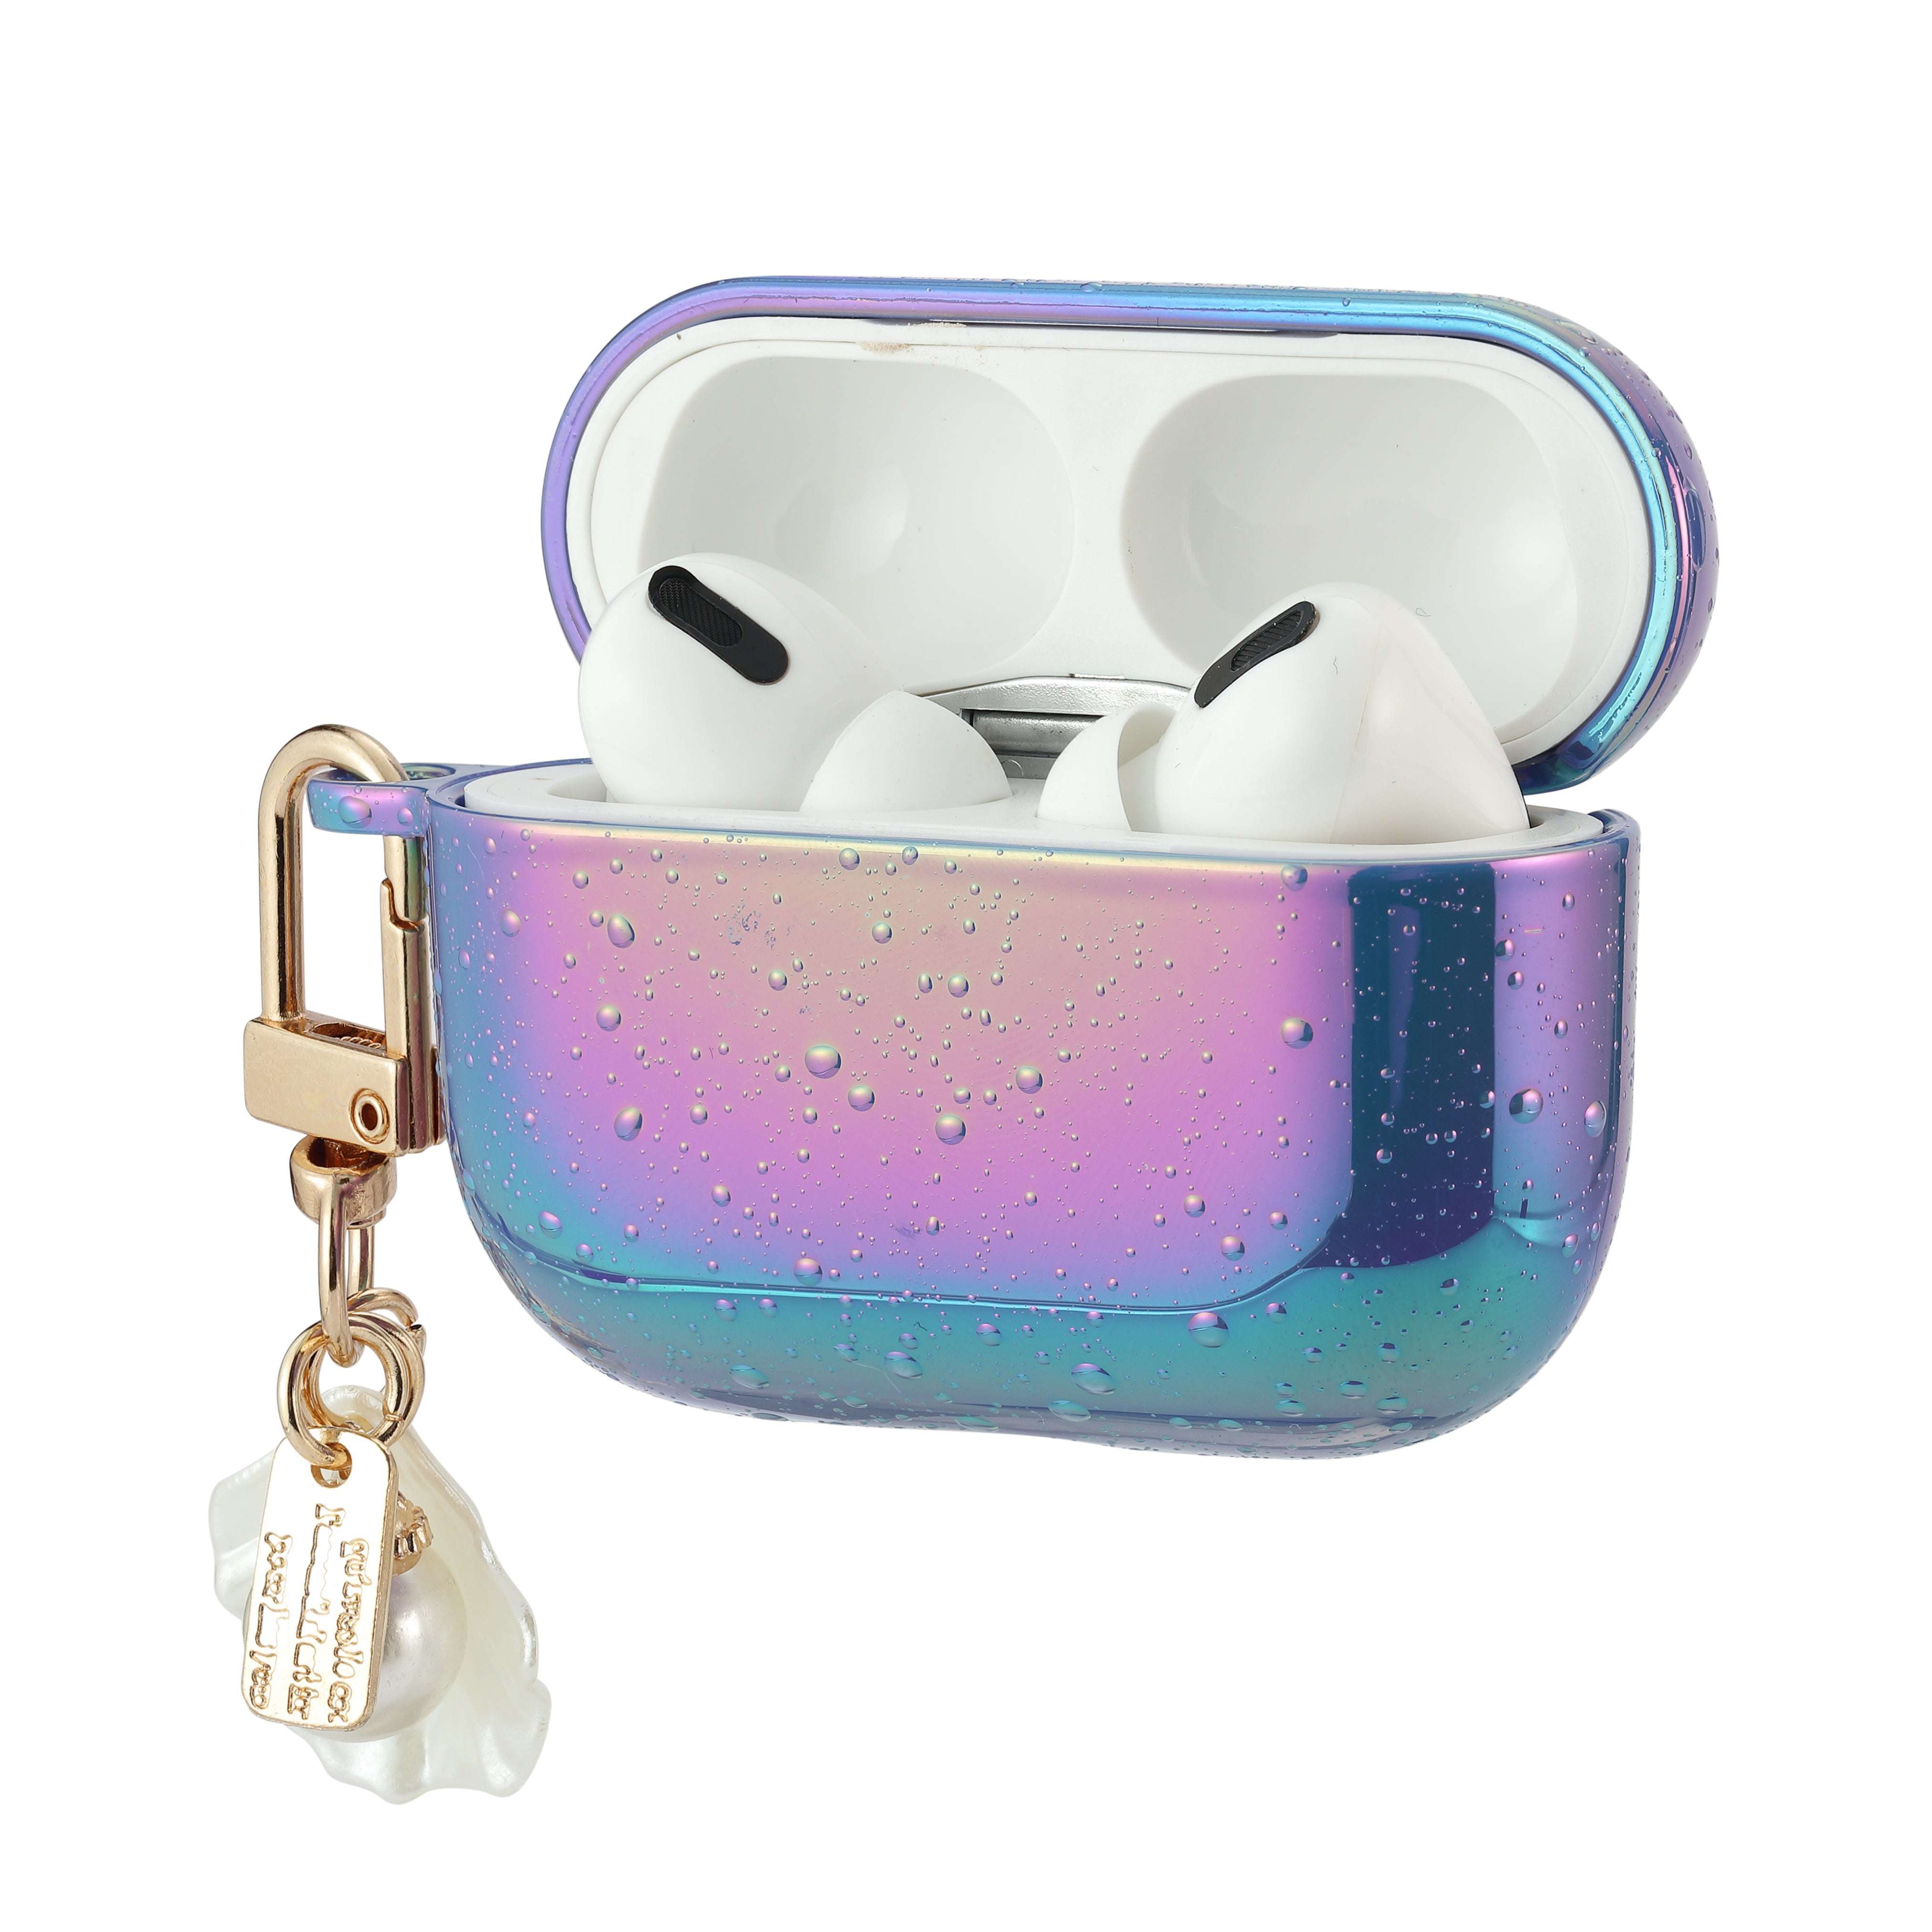 Protective Pearl essence Cases for Airpods